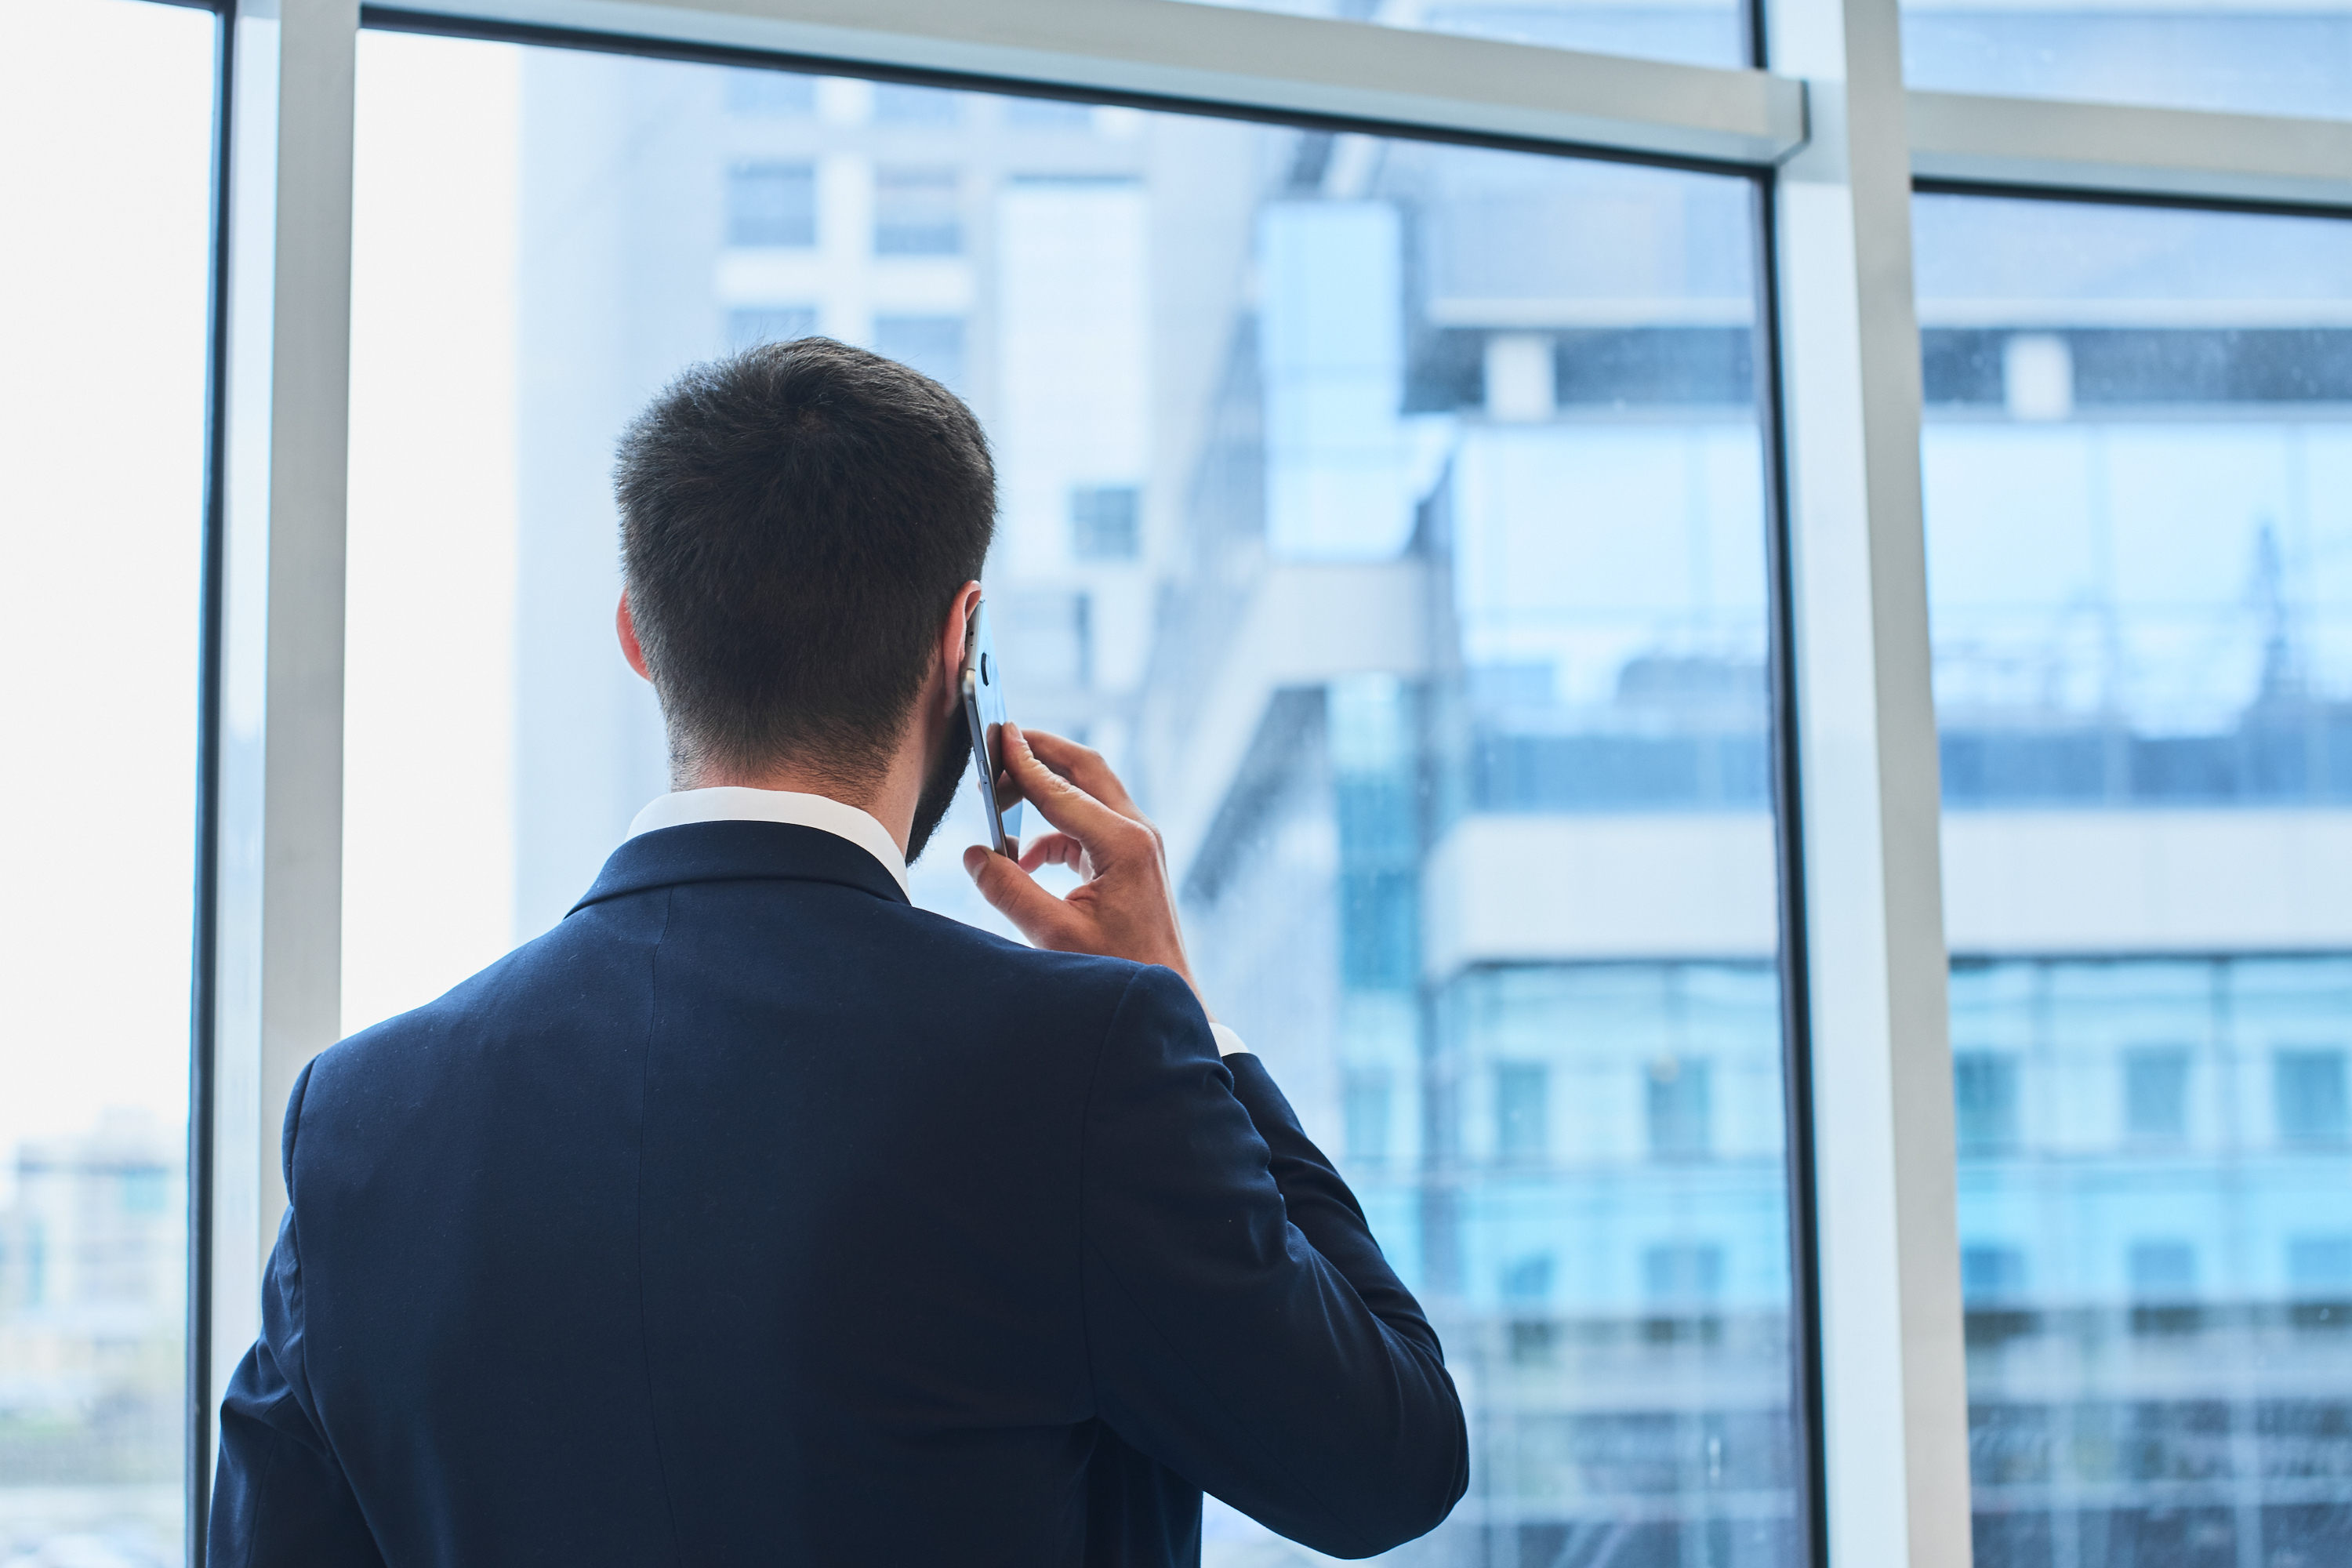 A man in an office talking on his phone | Source: Shutterstock